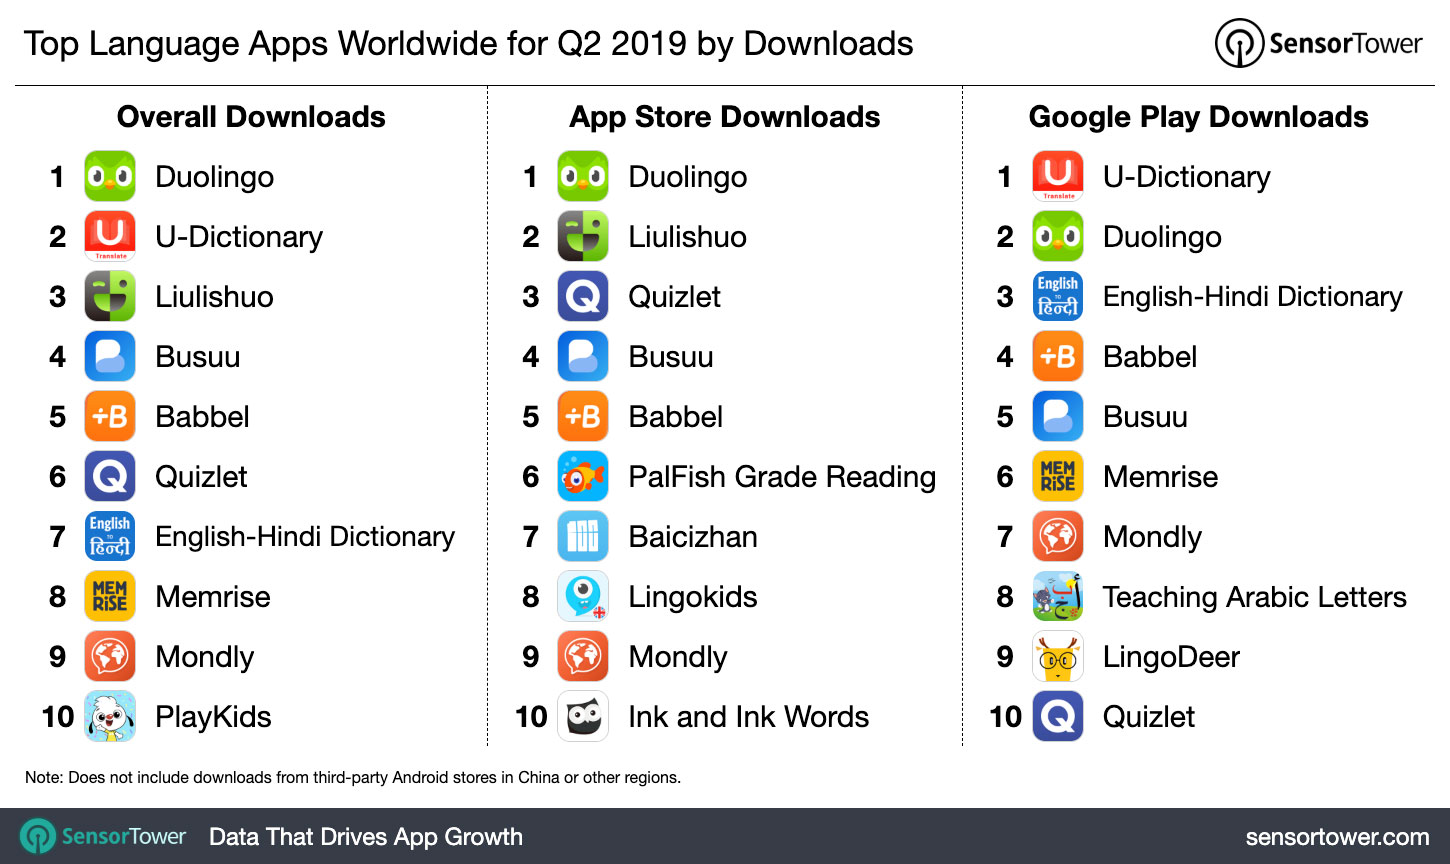 Top Language Apps Worldwide for Q2 2019 by Downloads